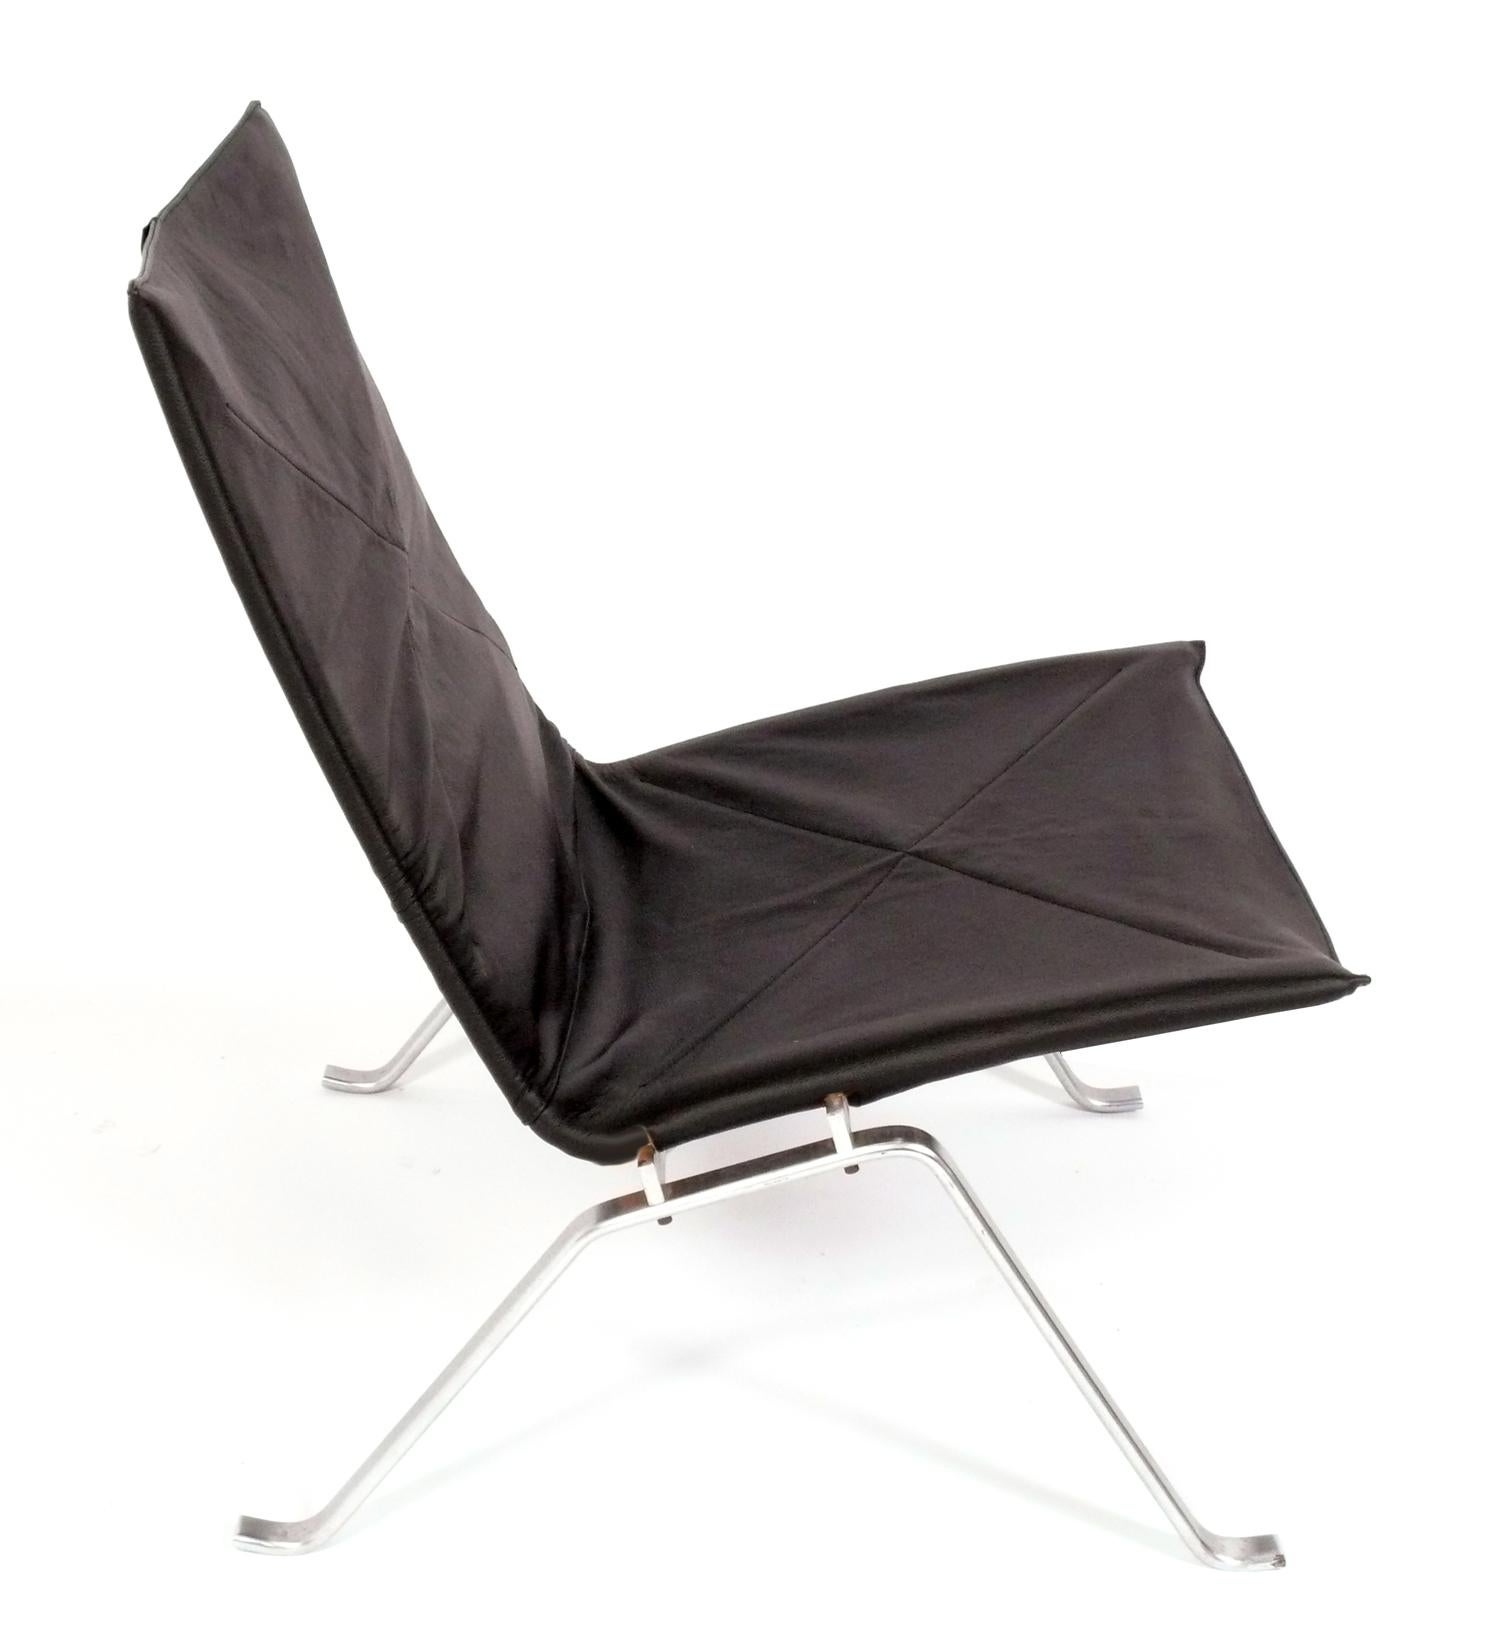 Sculptural PK22 Model Lounge Chair, designed by Poul Kjaerholm for E Kold Christensen, signed, Denmark, circa 1960s. According to the estate where we purchased this chair, the leather cover was replaced in the early 2000s. It does not fit perfectly